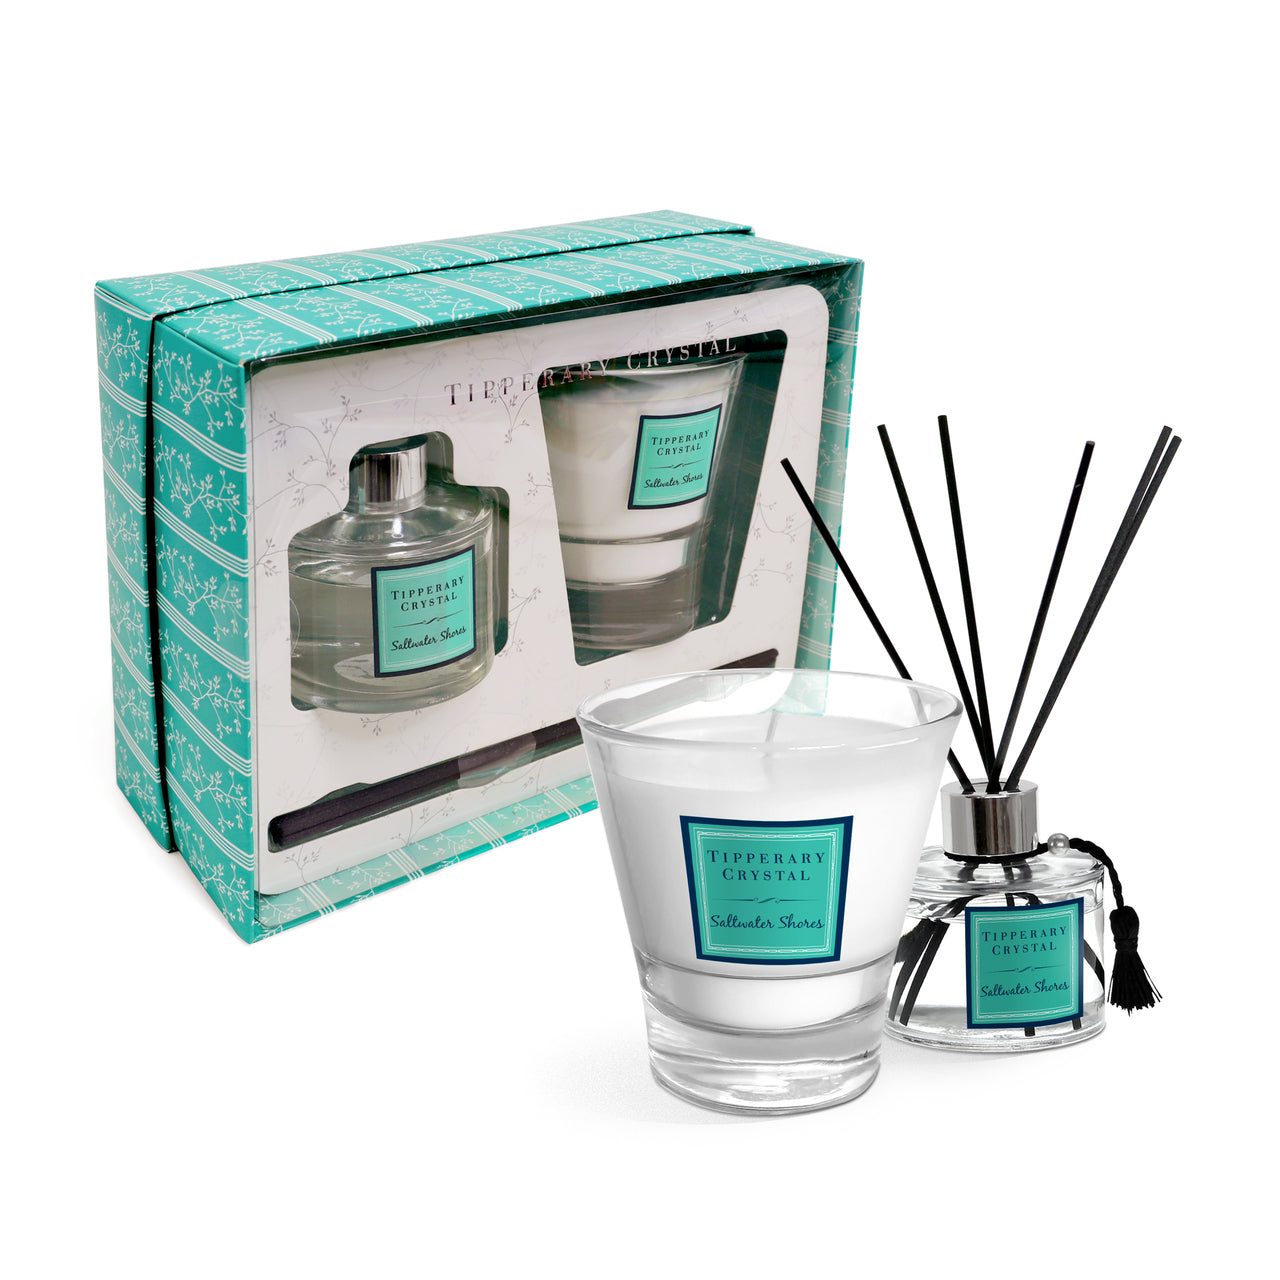 Tipperary Crystal Saltwater Shores Candle & Diffuser Folded Card Gift Set